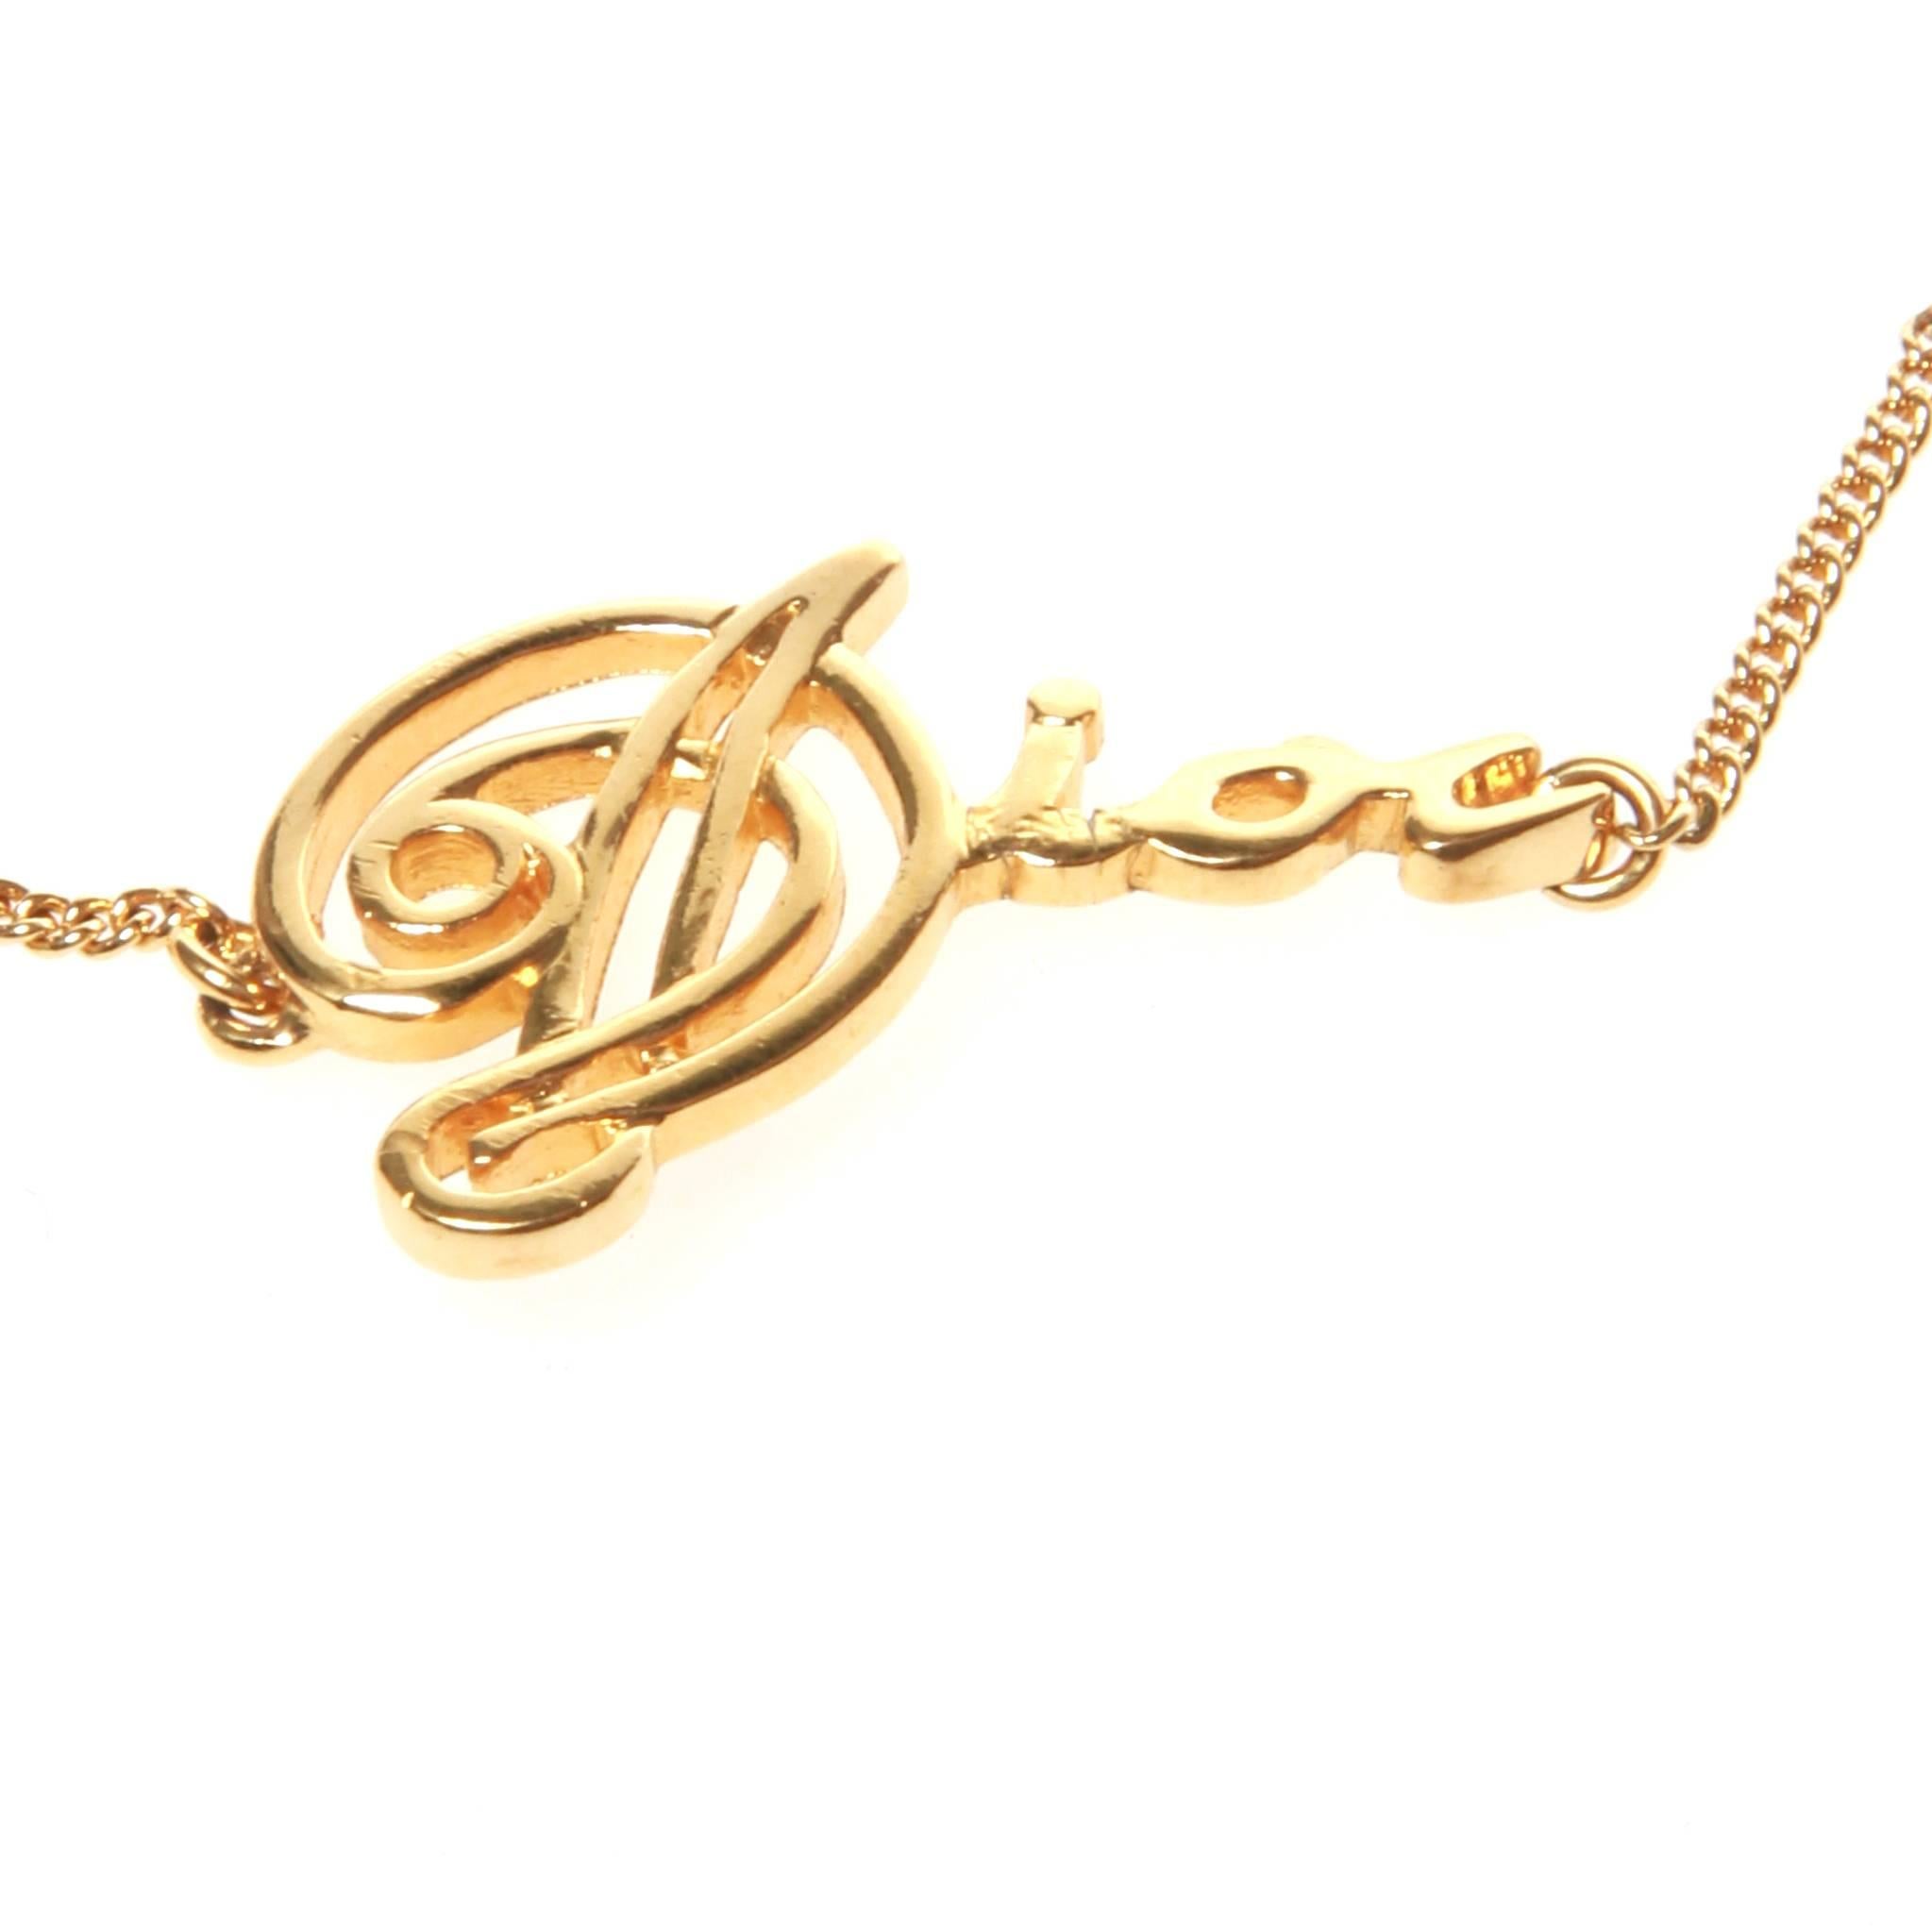 Christian Dior gold bracelet featuring 'Dior' in cursive font on a thin chain. Size adjustment and lobster claw fastening with Dior stamped 'CD' at the end. 